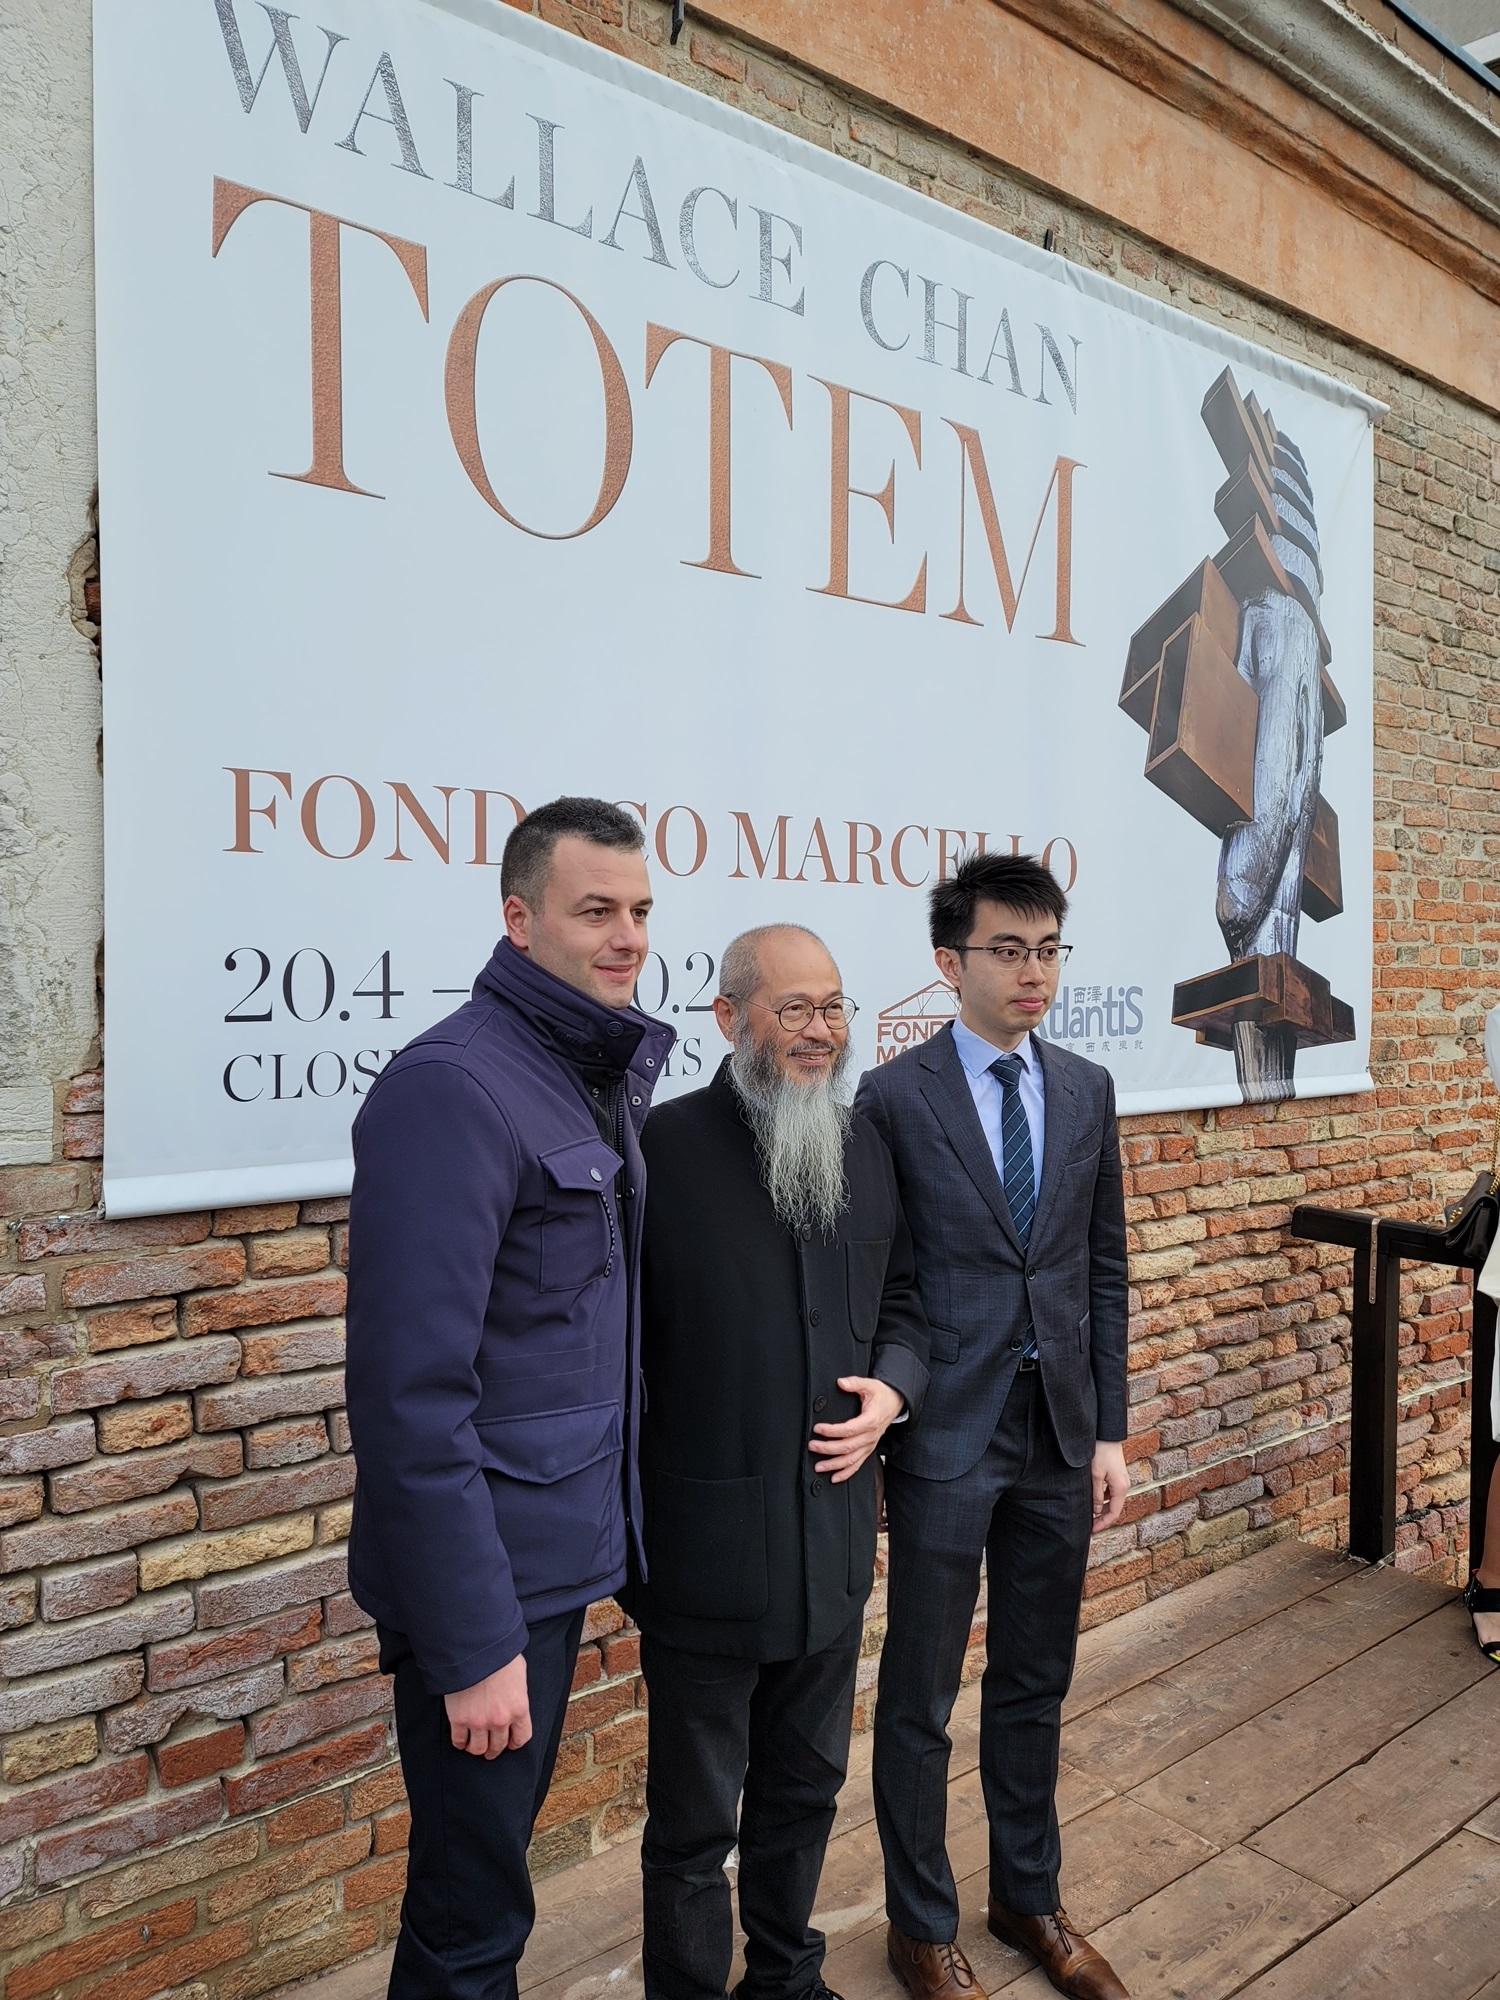 The Deputy Representative of the Hong Kong Economic and Trade Office in Brussels, Mr Henry Tsoi (right), attended the opening of the sculpture exhibition “Totem” launched by Hong Kong-based artist Wallace Chan (centre) in Venice on April 20 (Venice time). Also present was Mr Simone Venturini, Deputy Mayor of Venice (left).